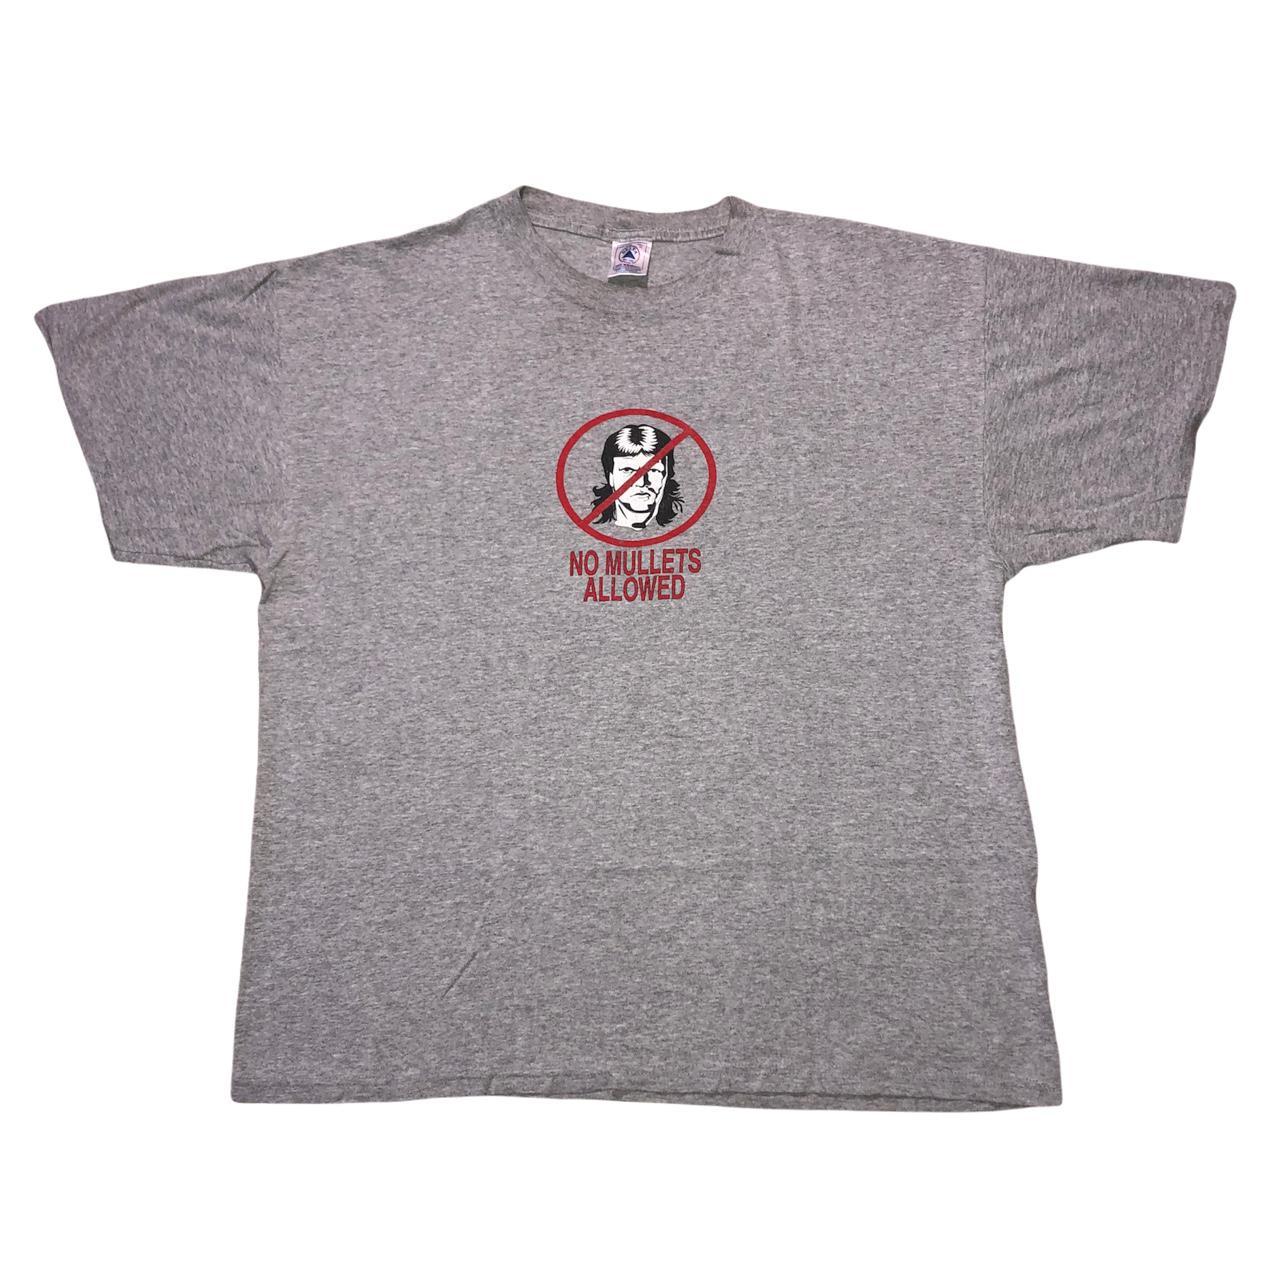 Men's Grey and Red T-shirt